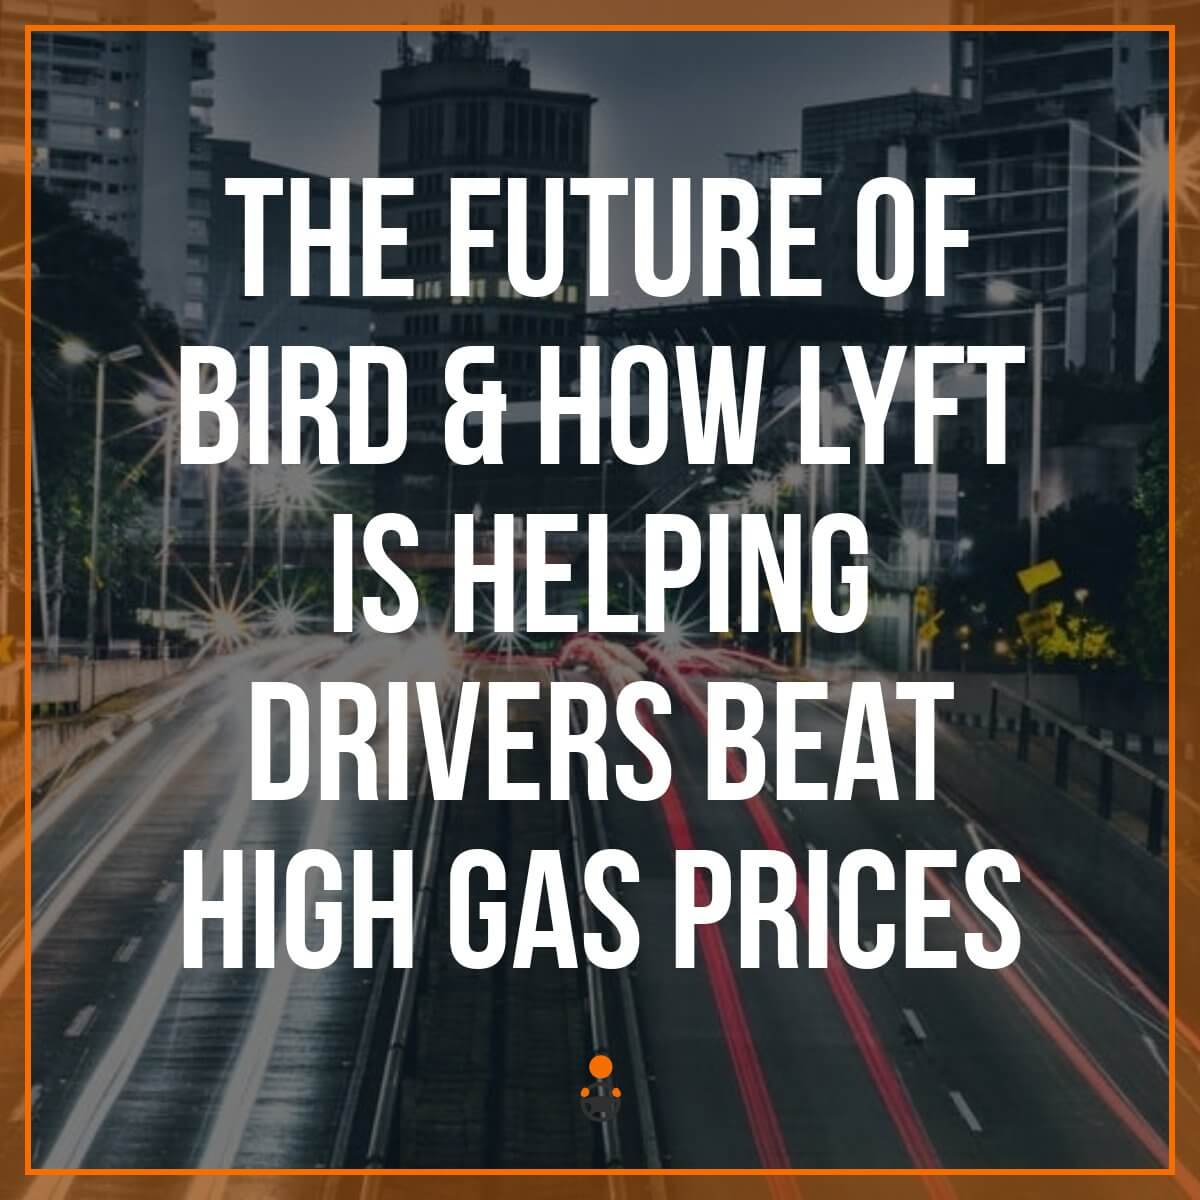 A lot to get to in this week’s round up, including Bird’s explosive growth, how Uber’s biggest crisis yet all started with vomit, and how Lyft is helping drivers save money on gas. Senior RSG contributor John Ince covers that and more in this week’s round up.